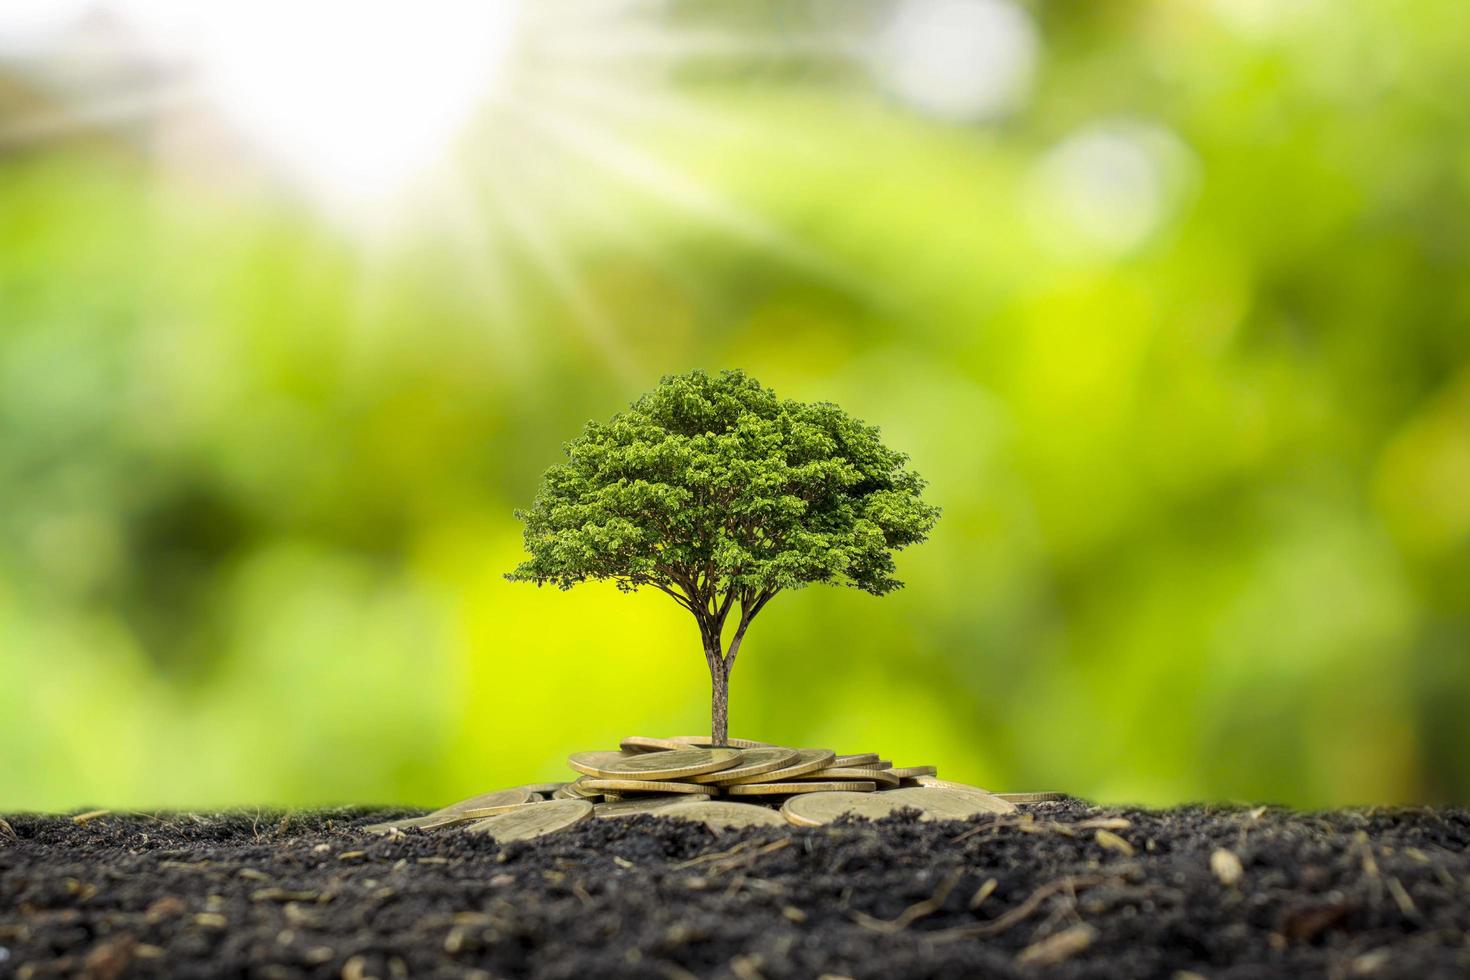 The saplings that grow on the pile of coins include the white light flooding the trees, business ideas, saving money, and economic growth photo